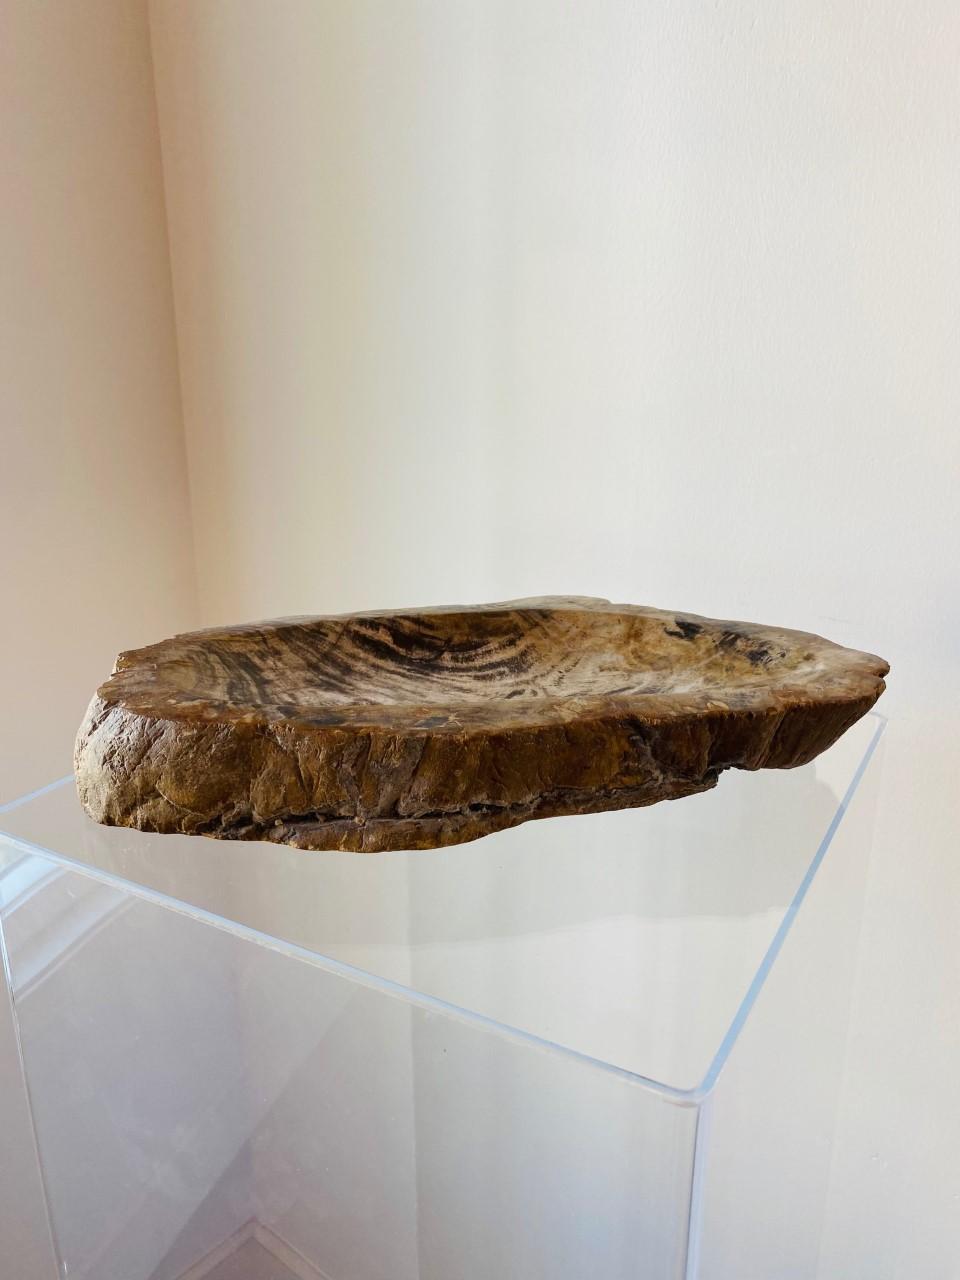 Organic Modern petrified wood bowl naturally fossilized throughout thousands of years. These rare pieces have been hand cut and feature the highest quality petrified wood with polished centers and natural live edges. Features streaks and veining in